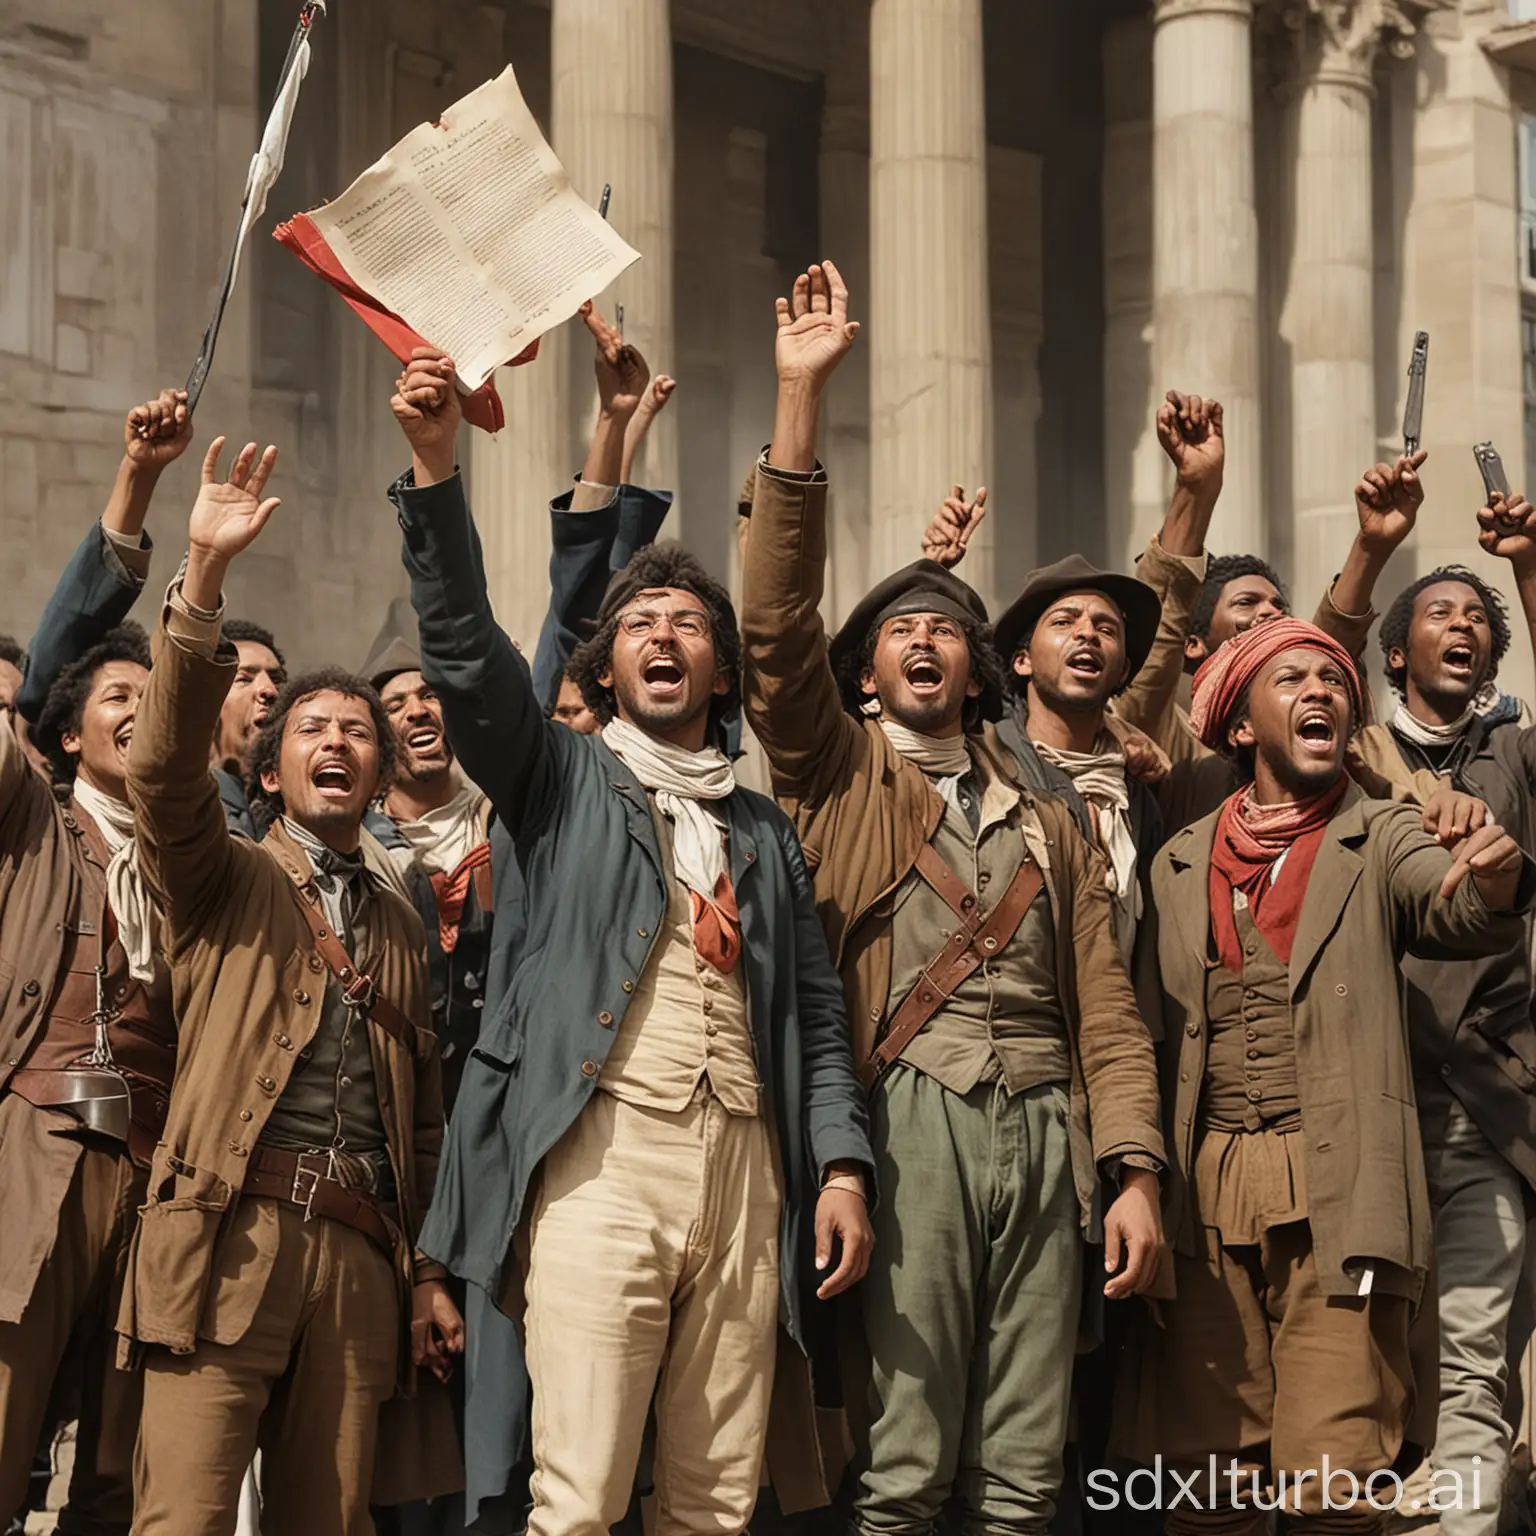 A group of revolutionaries, celebrating with the Declaration of Human and Citizen Rights in hand.